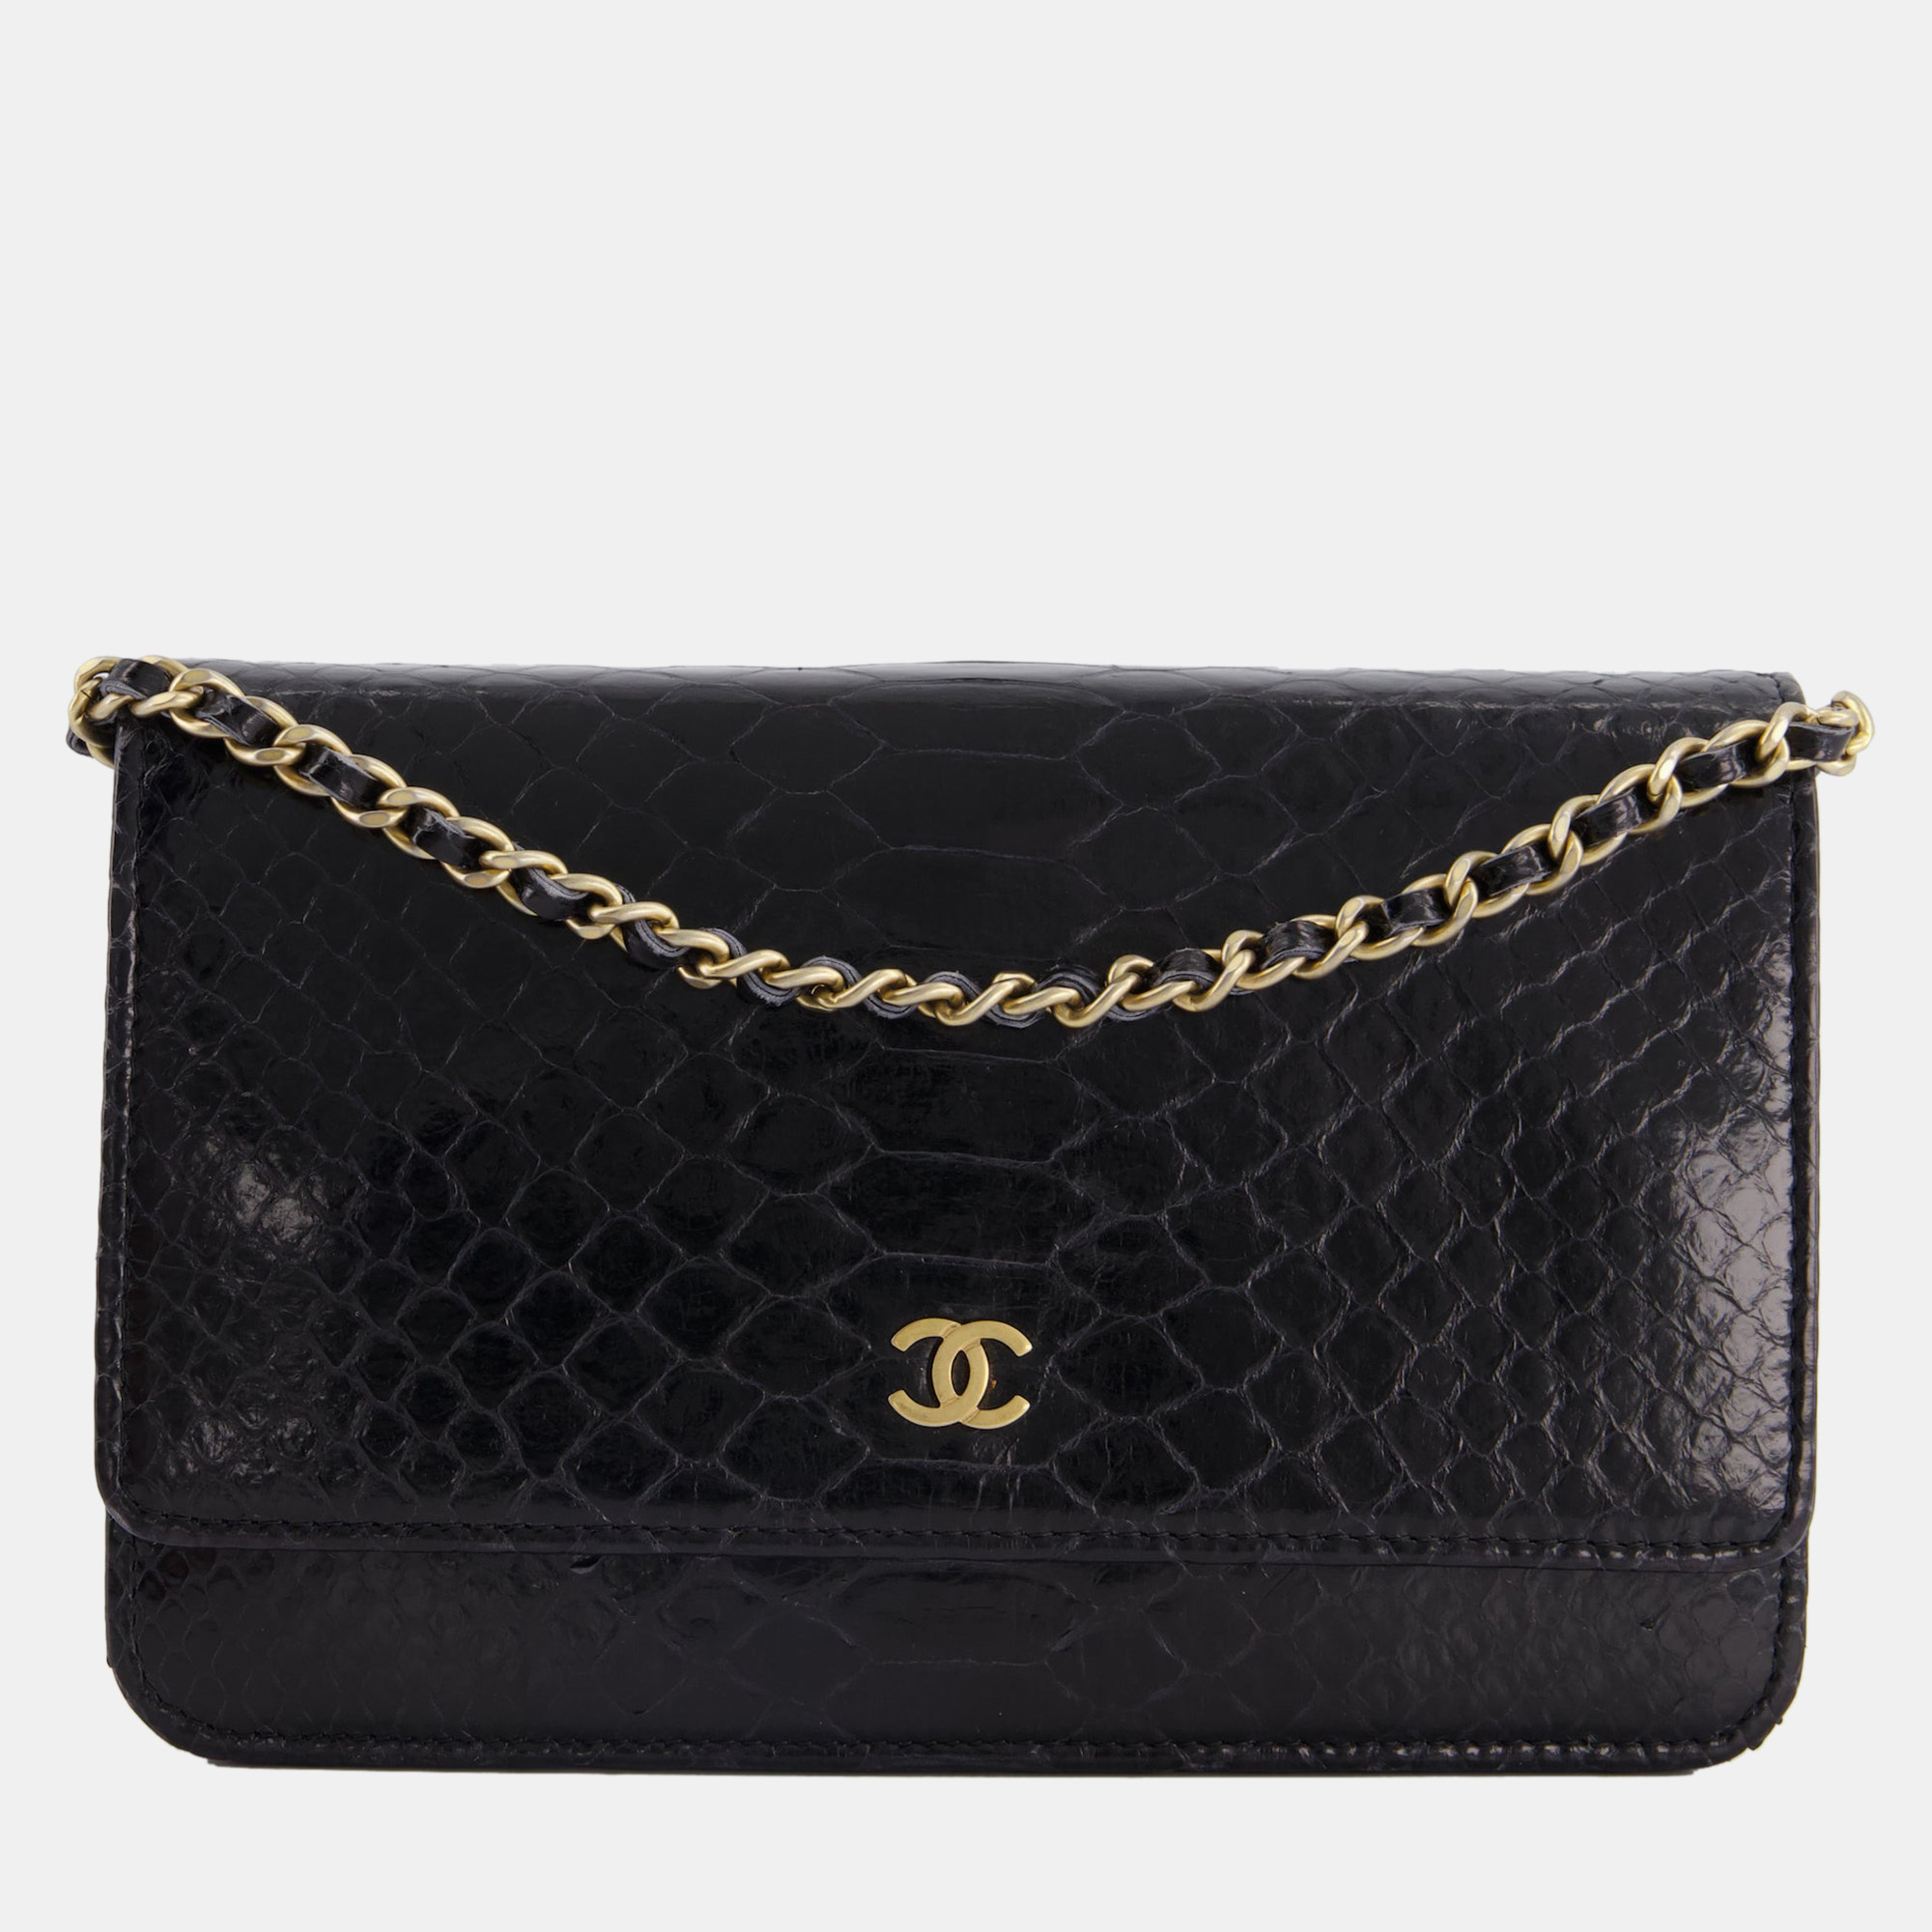 Chanel black python wallet on chain bag with brushed gold hardware